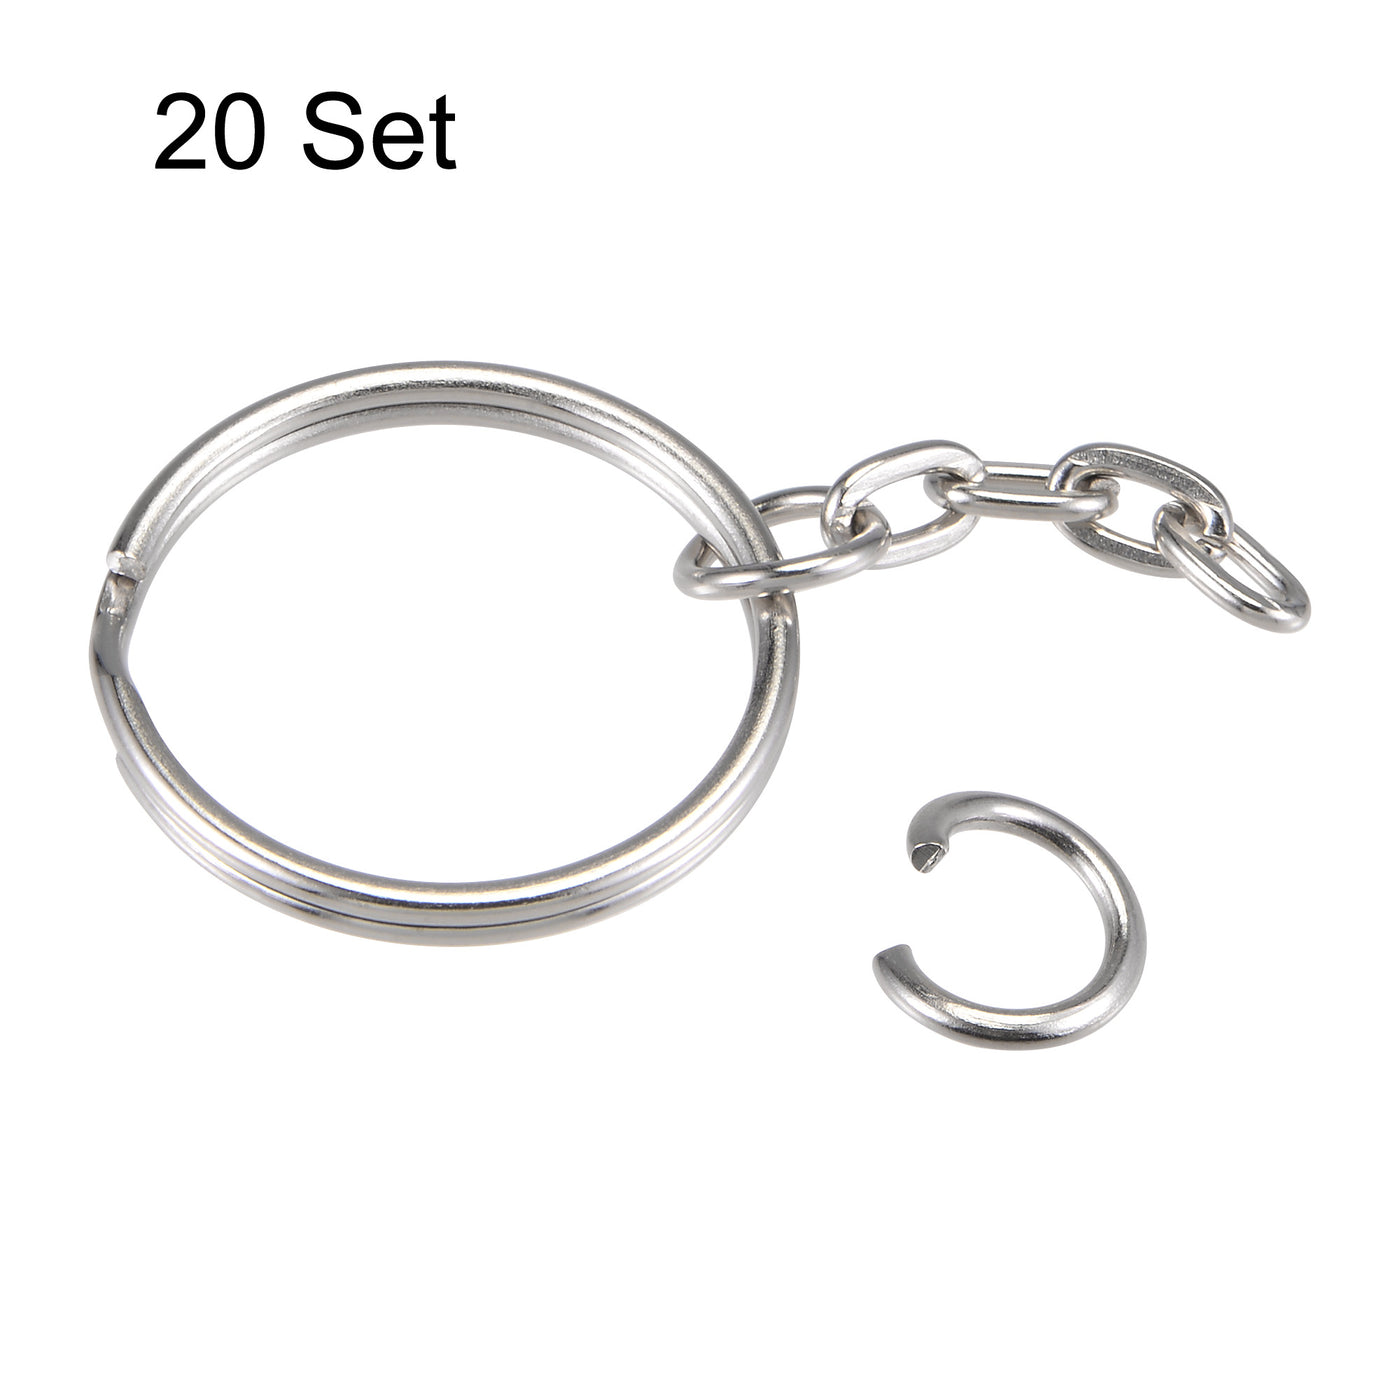 uxcell Uxcell Split Key Ring with 4 Links Chain 1.5x25mm, with 8mm Open Jump Ring Connector for Lanyard Zipper Handbag Art Craft, Nickel Plated Iron, Pack of 20